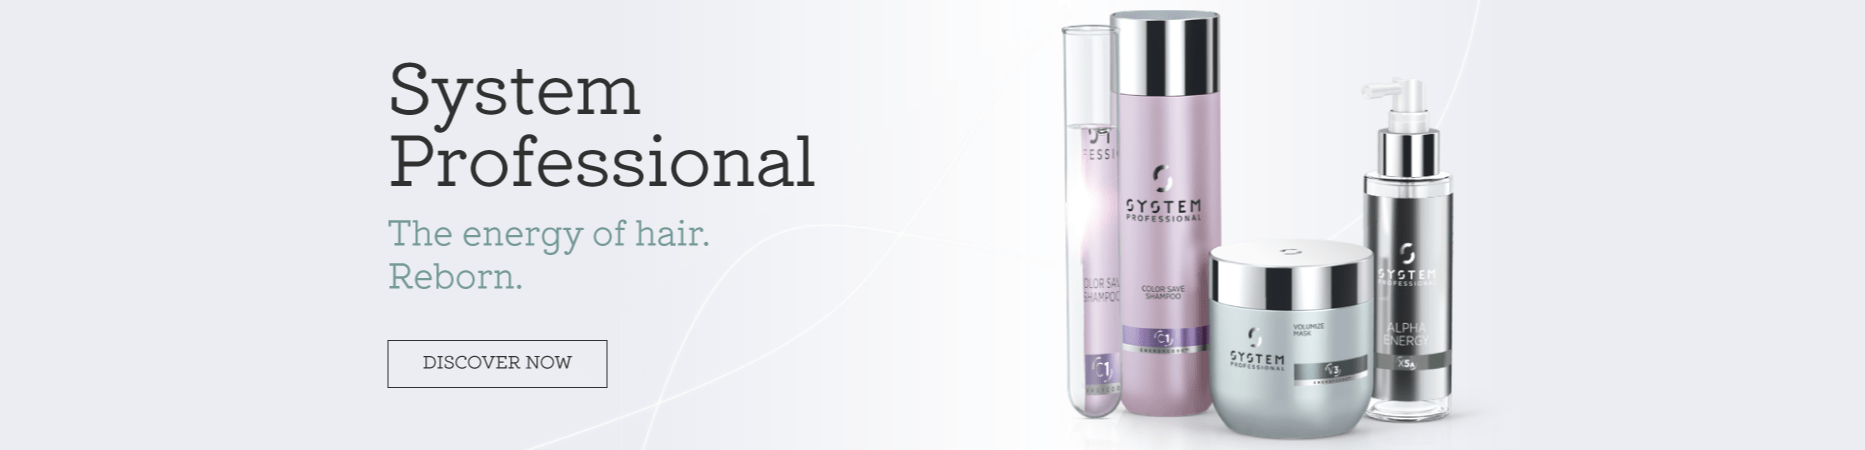 System Professional hair care products